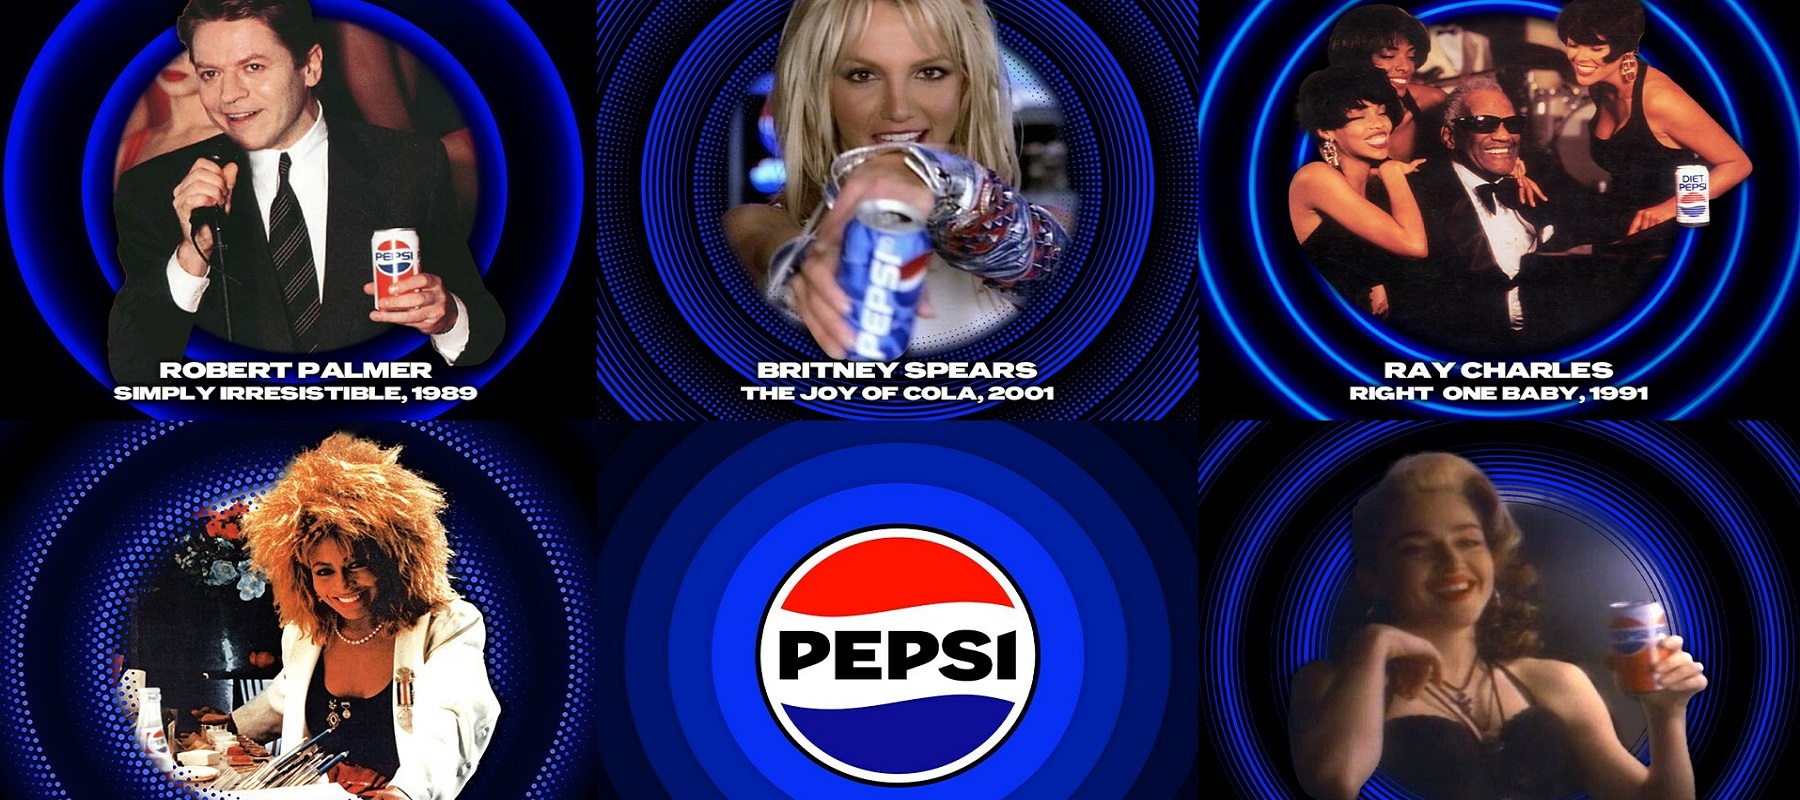 Pepsi re-releases music video commercials in celebration of music legends